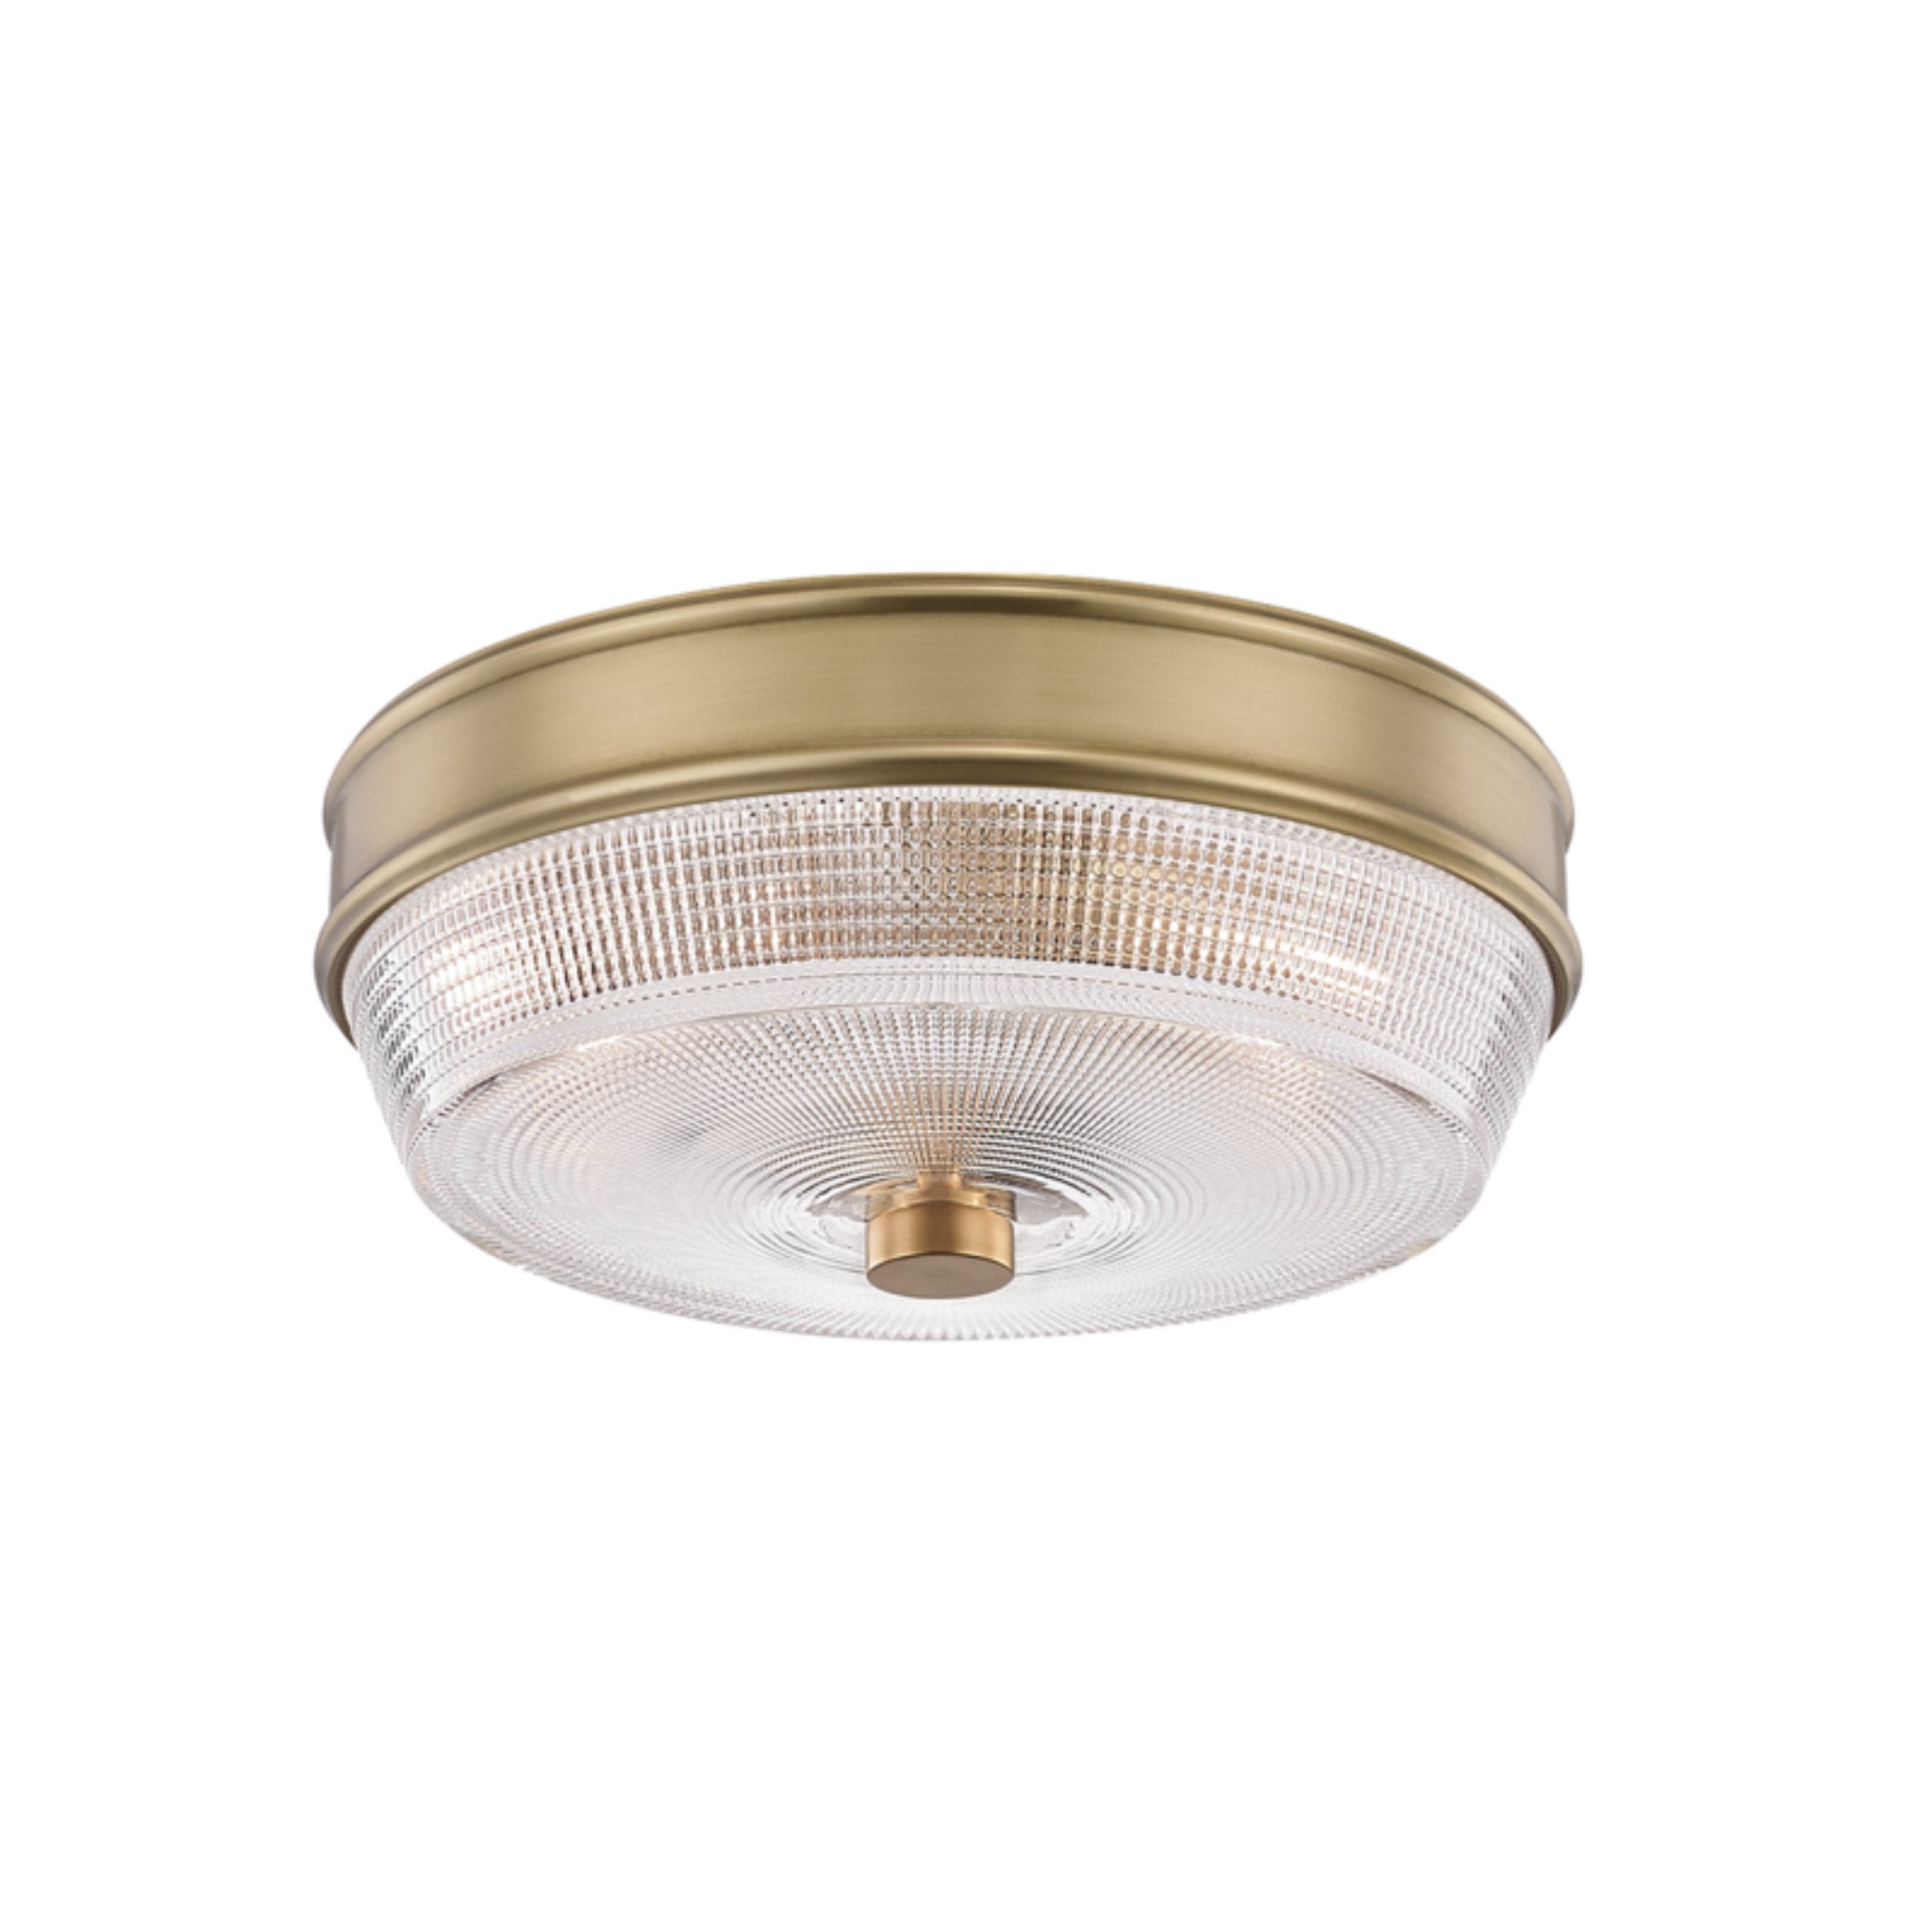 Lacey 2-Light Flush Mount in Aged Brass